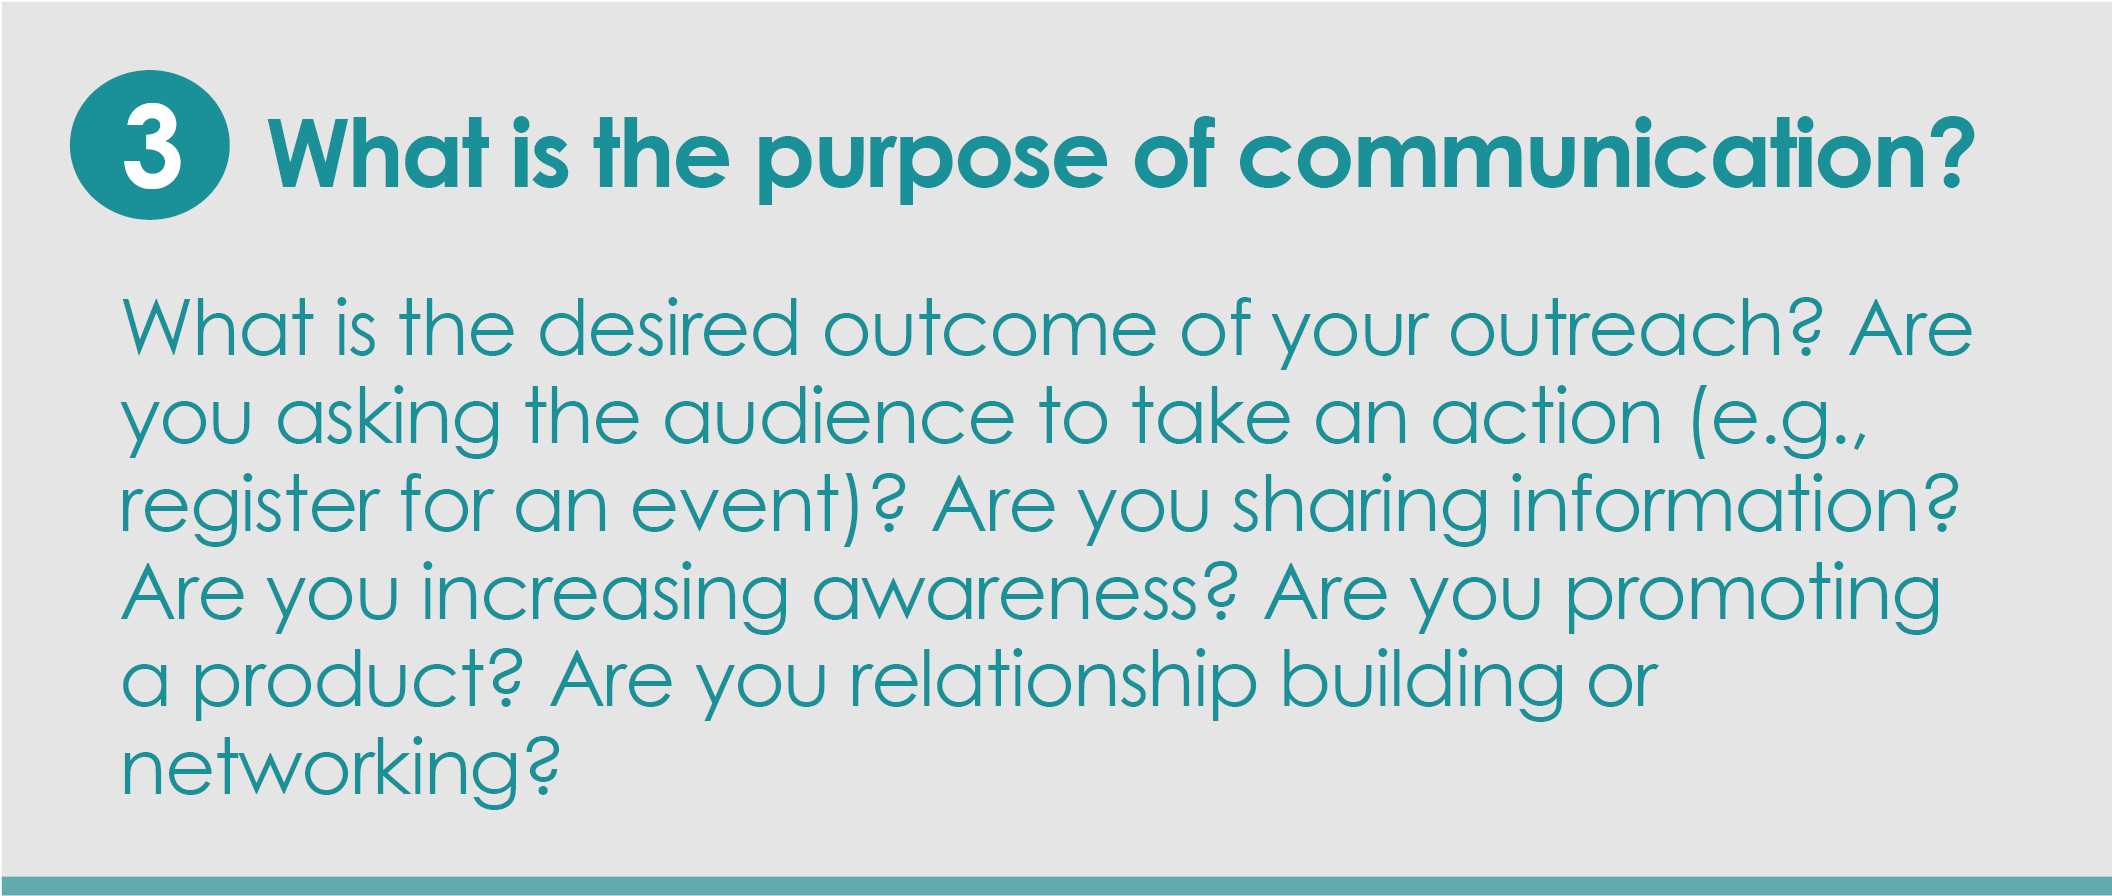 Step 3: What is the purpose of communication?What is the desired outcome of your outreach? Are you asking the audience to take an action (e.g., register for an event)? Are you sharing information? Are you increasing awareness? Are you promoting a product? Are you relationship building or networking?